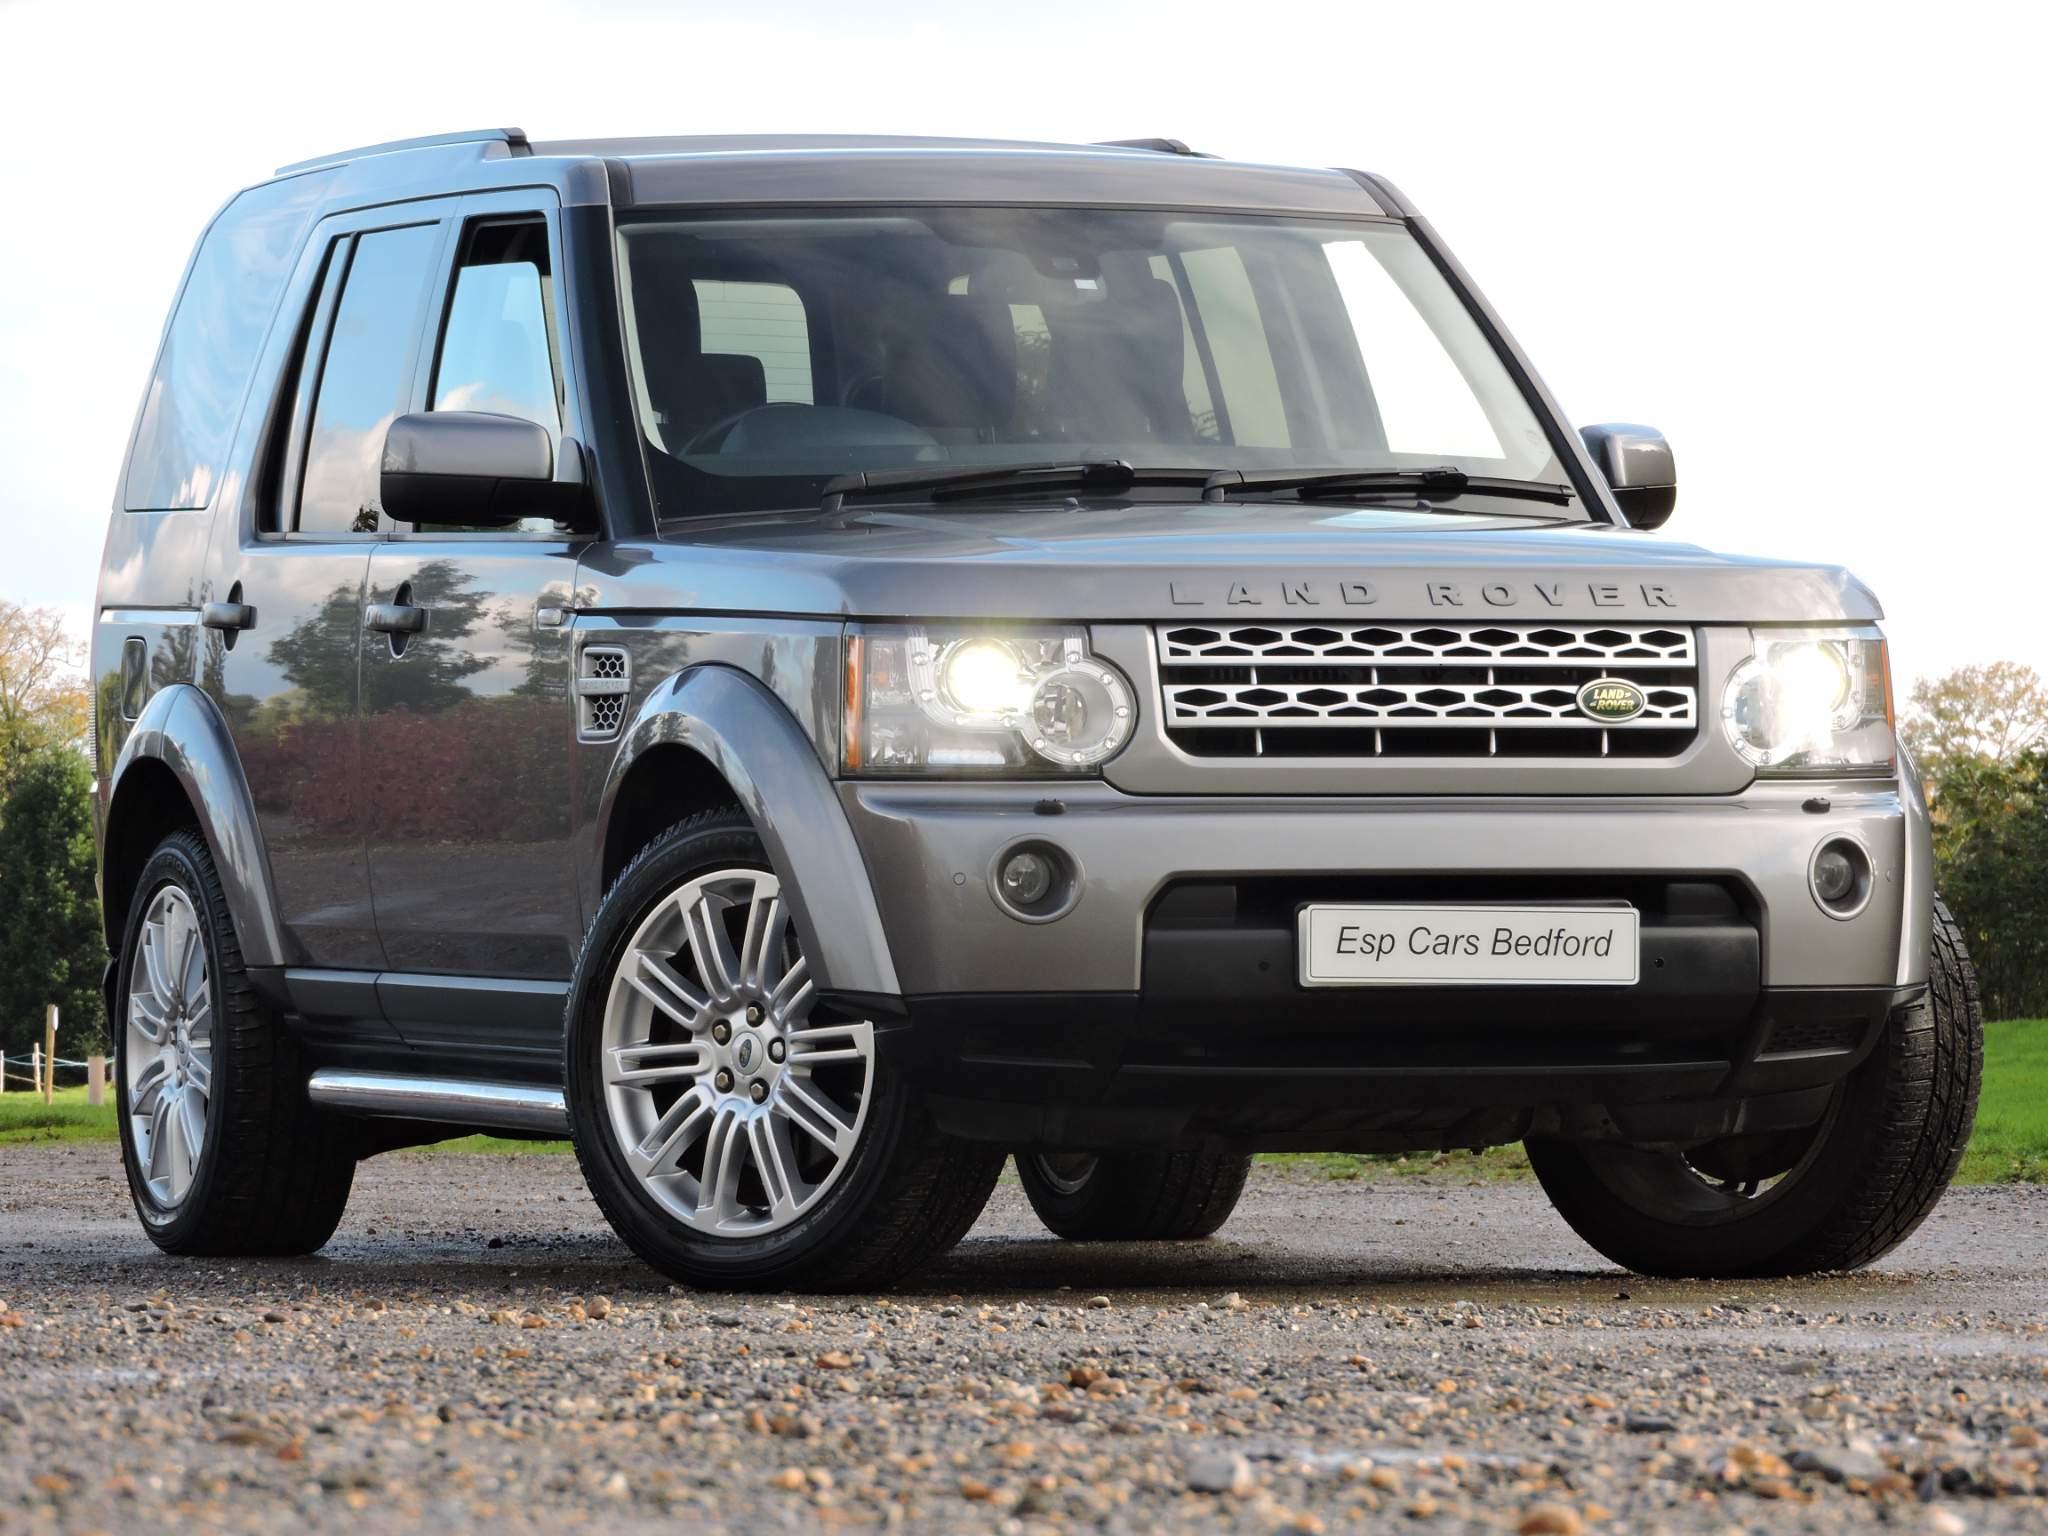 Land Rover Discovery 4 3.0 TD V6 HSE Auto 4WD Euro 4 5dr - £13990